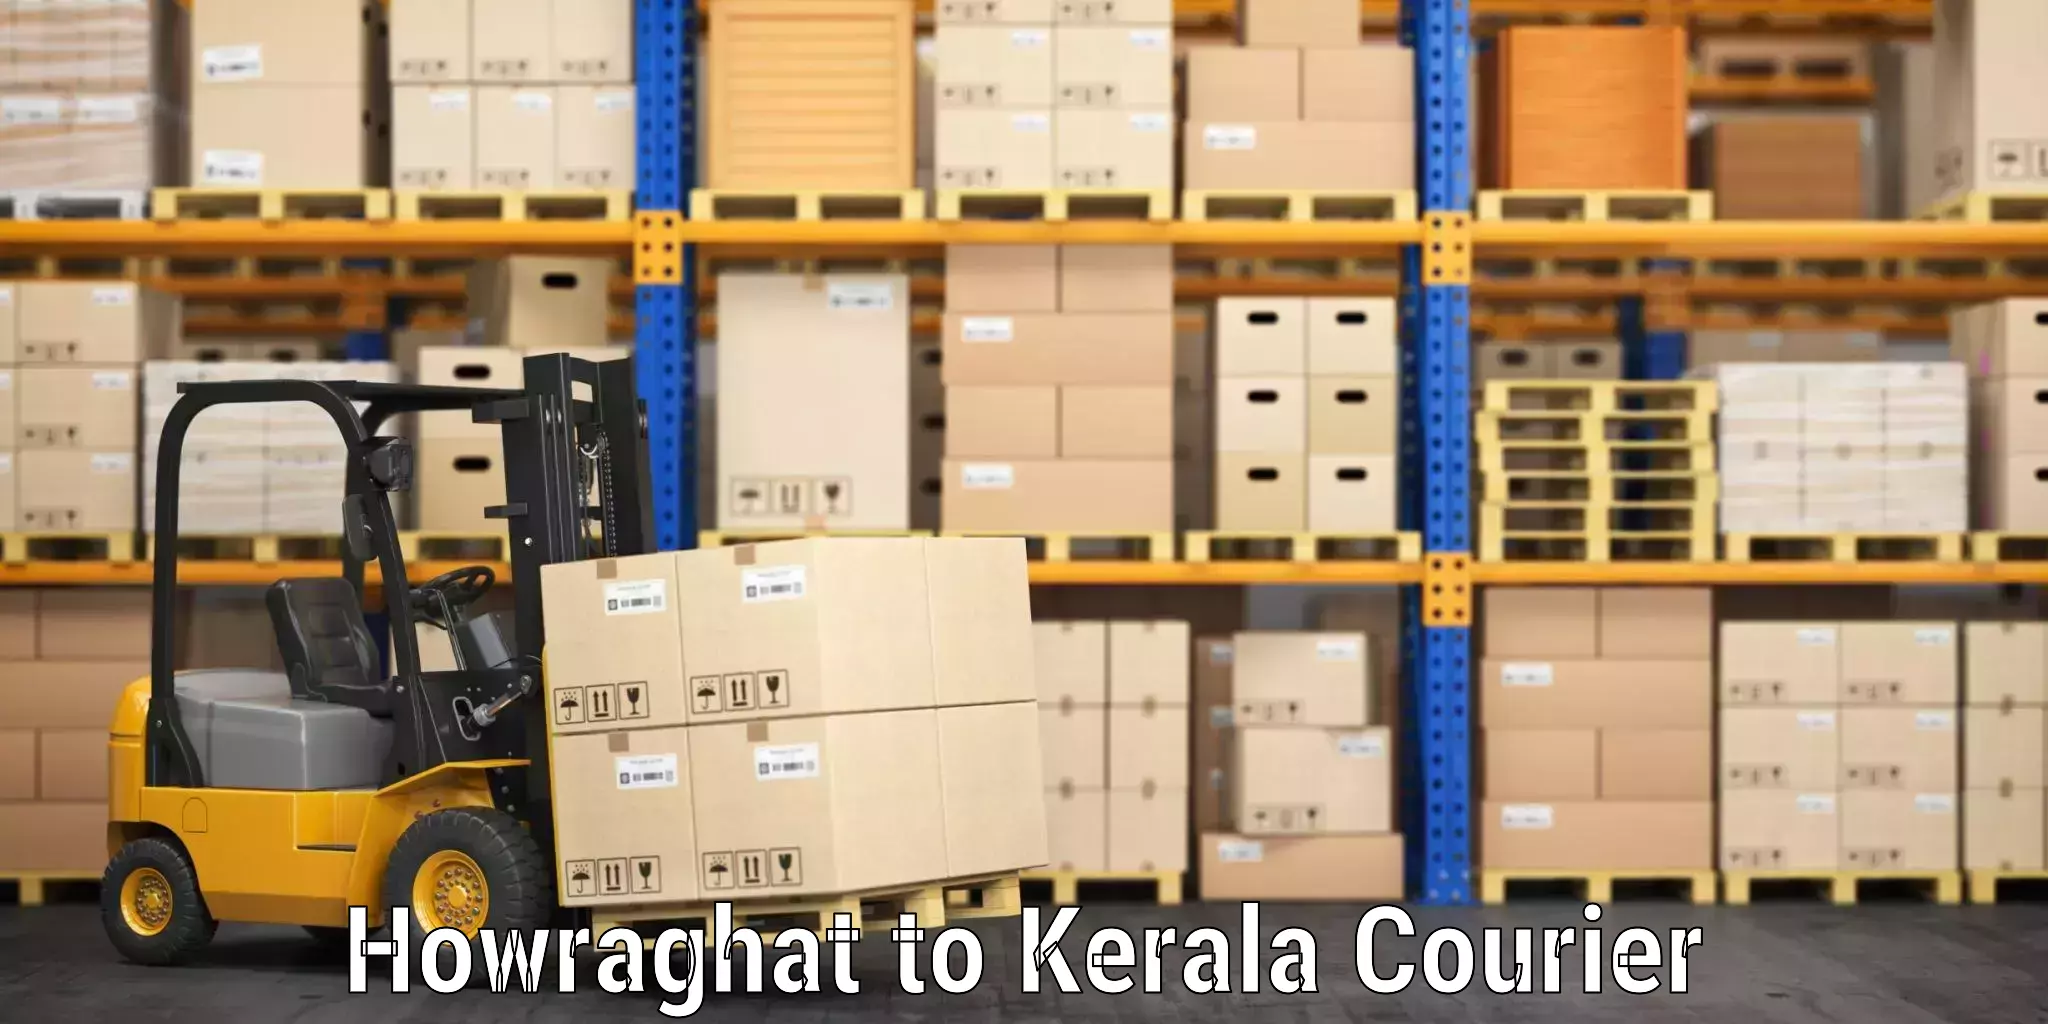 Baggage transport scheduler Howraghat to Chengannur